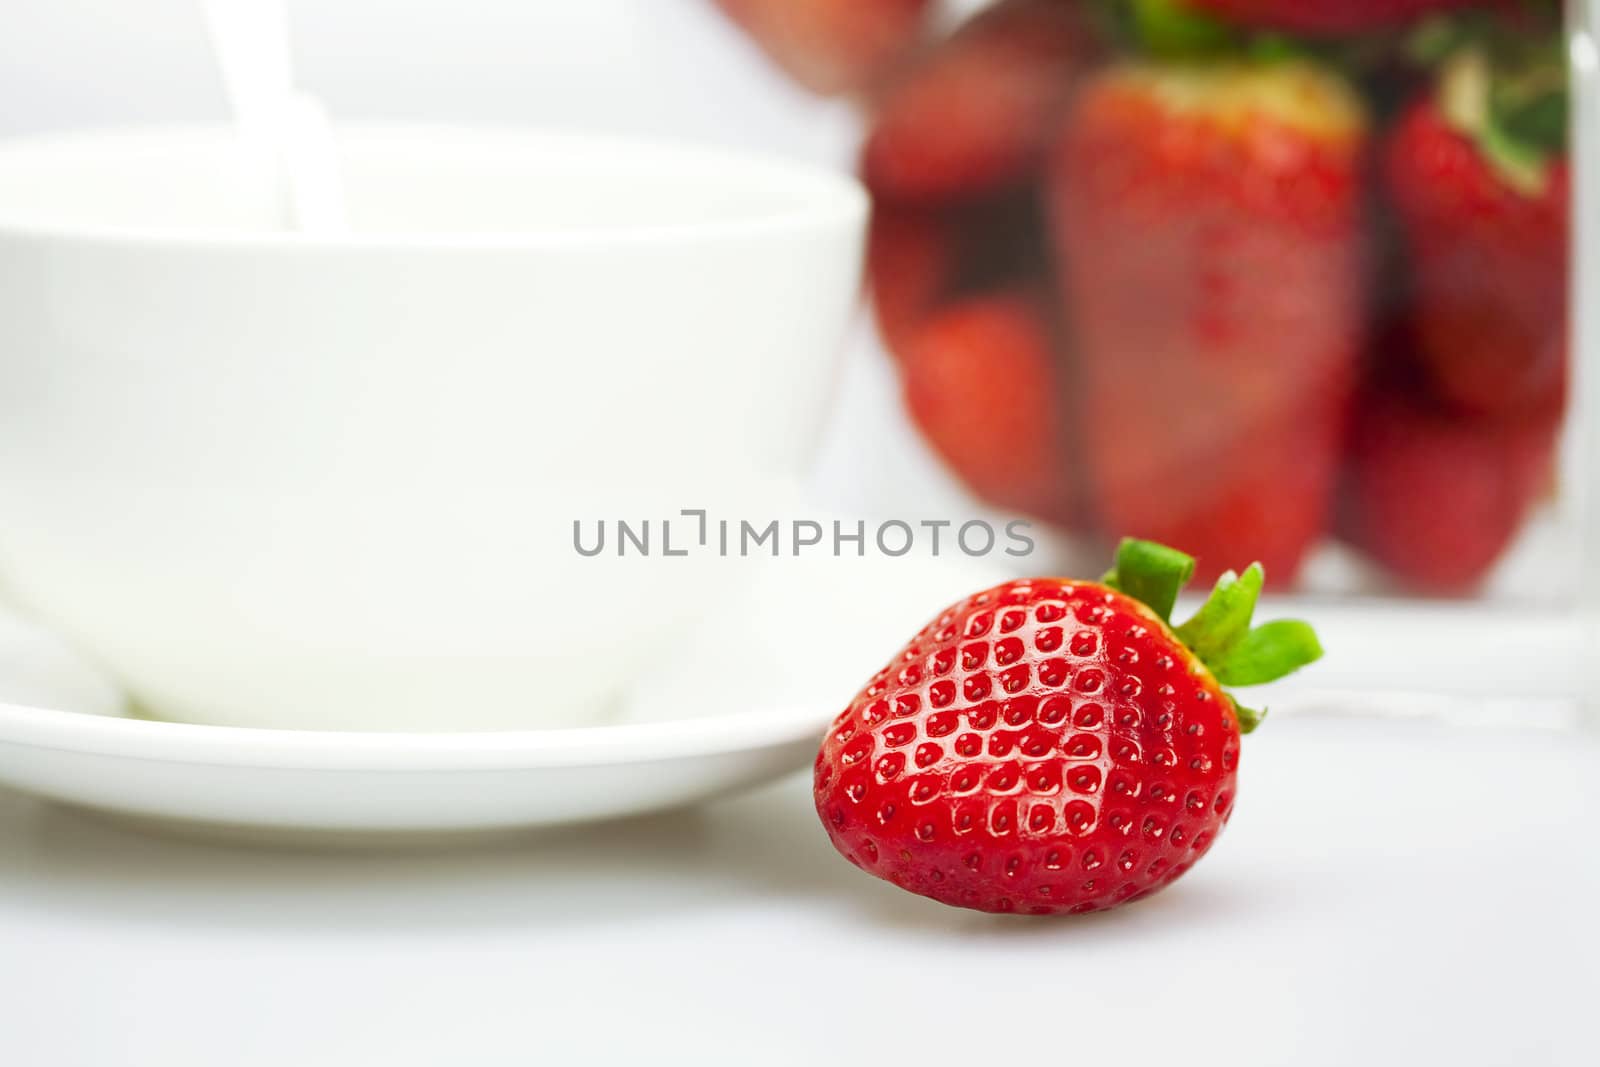 juicy strawberries and a cup of white isolated on white by jannyjus